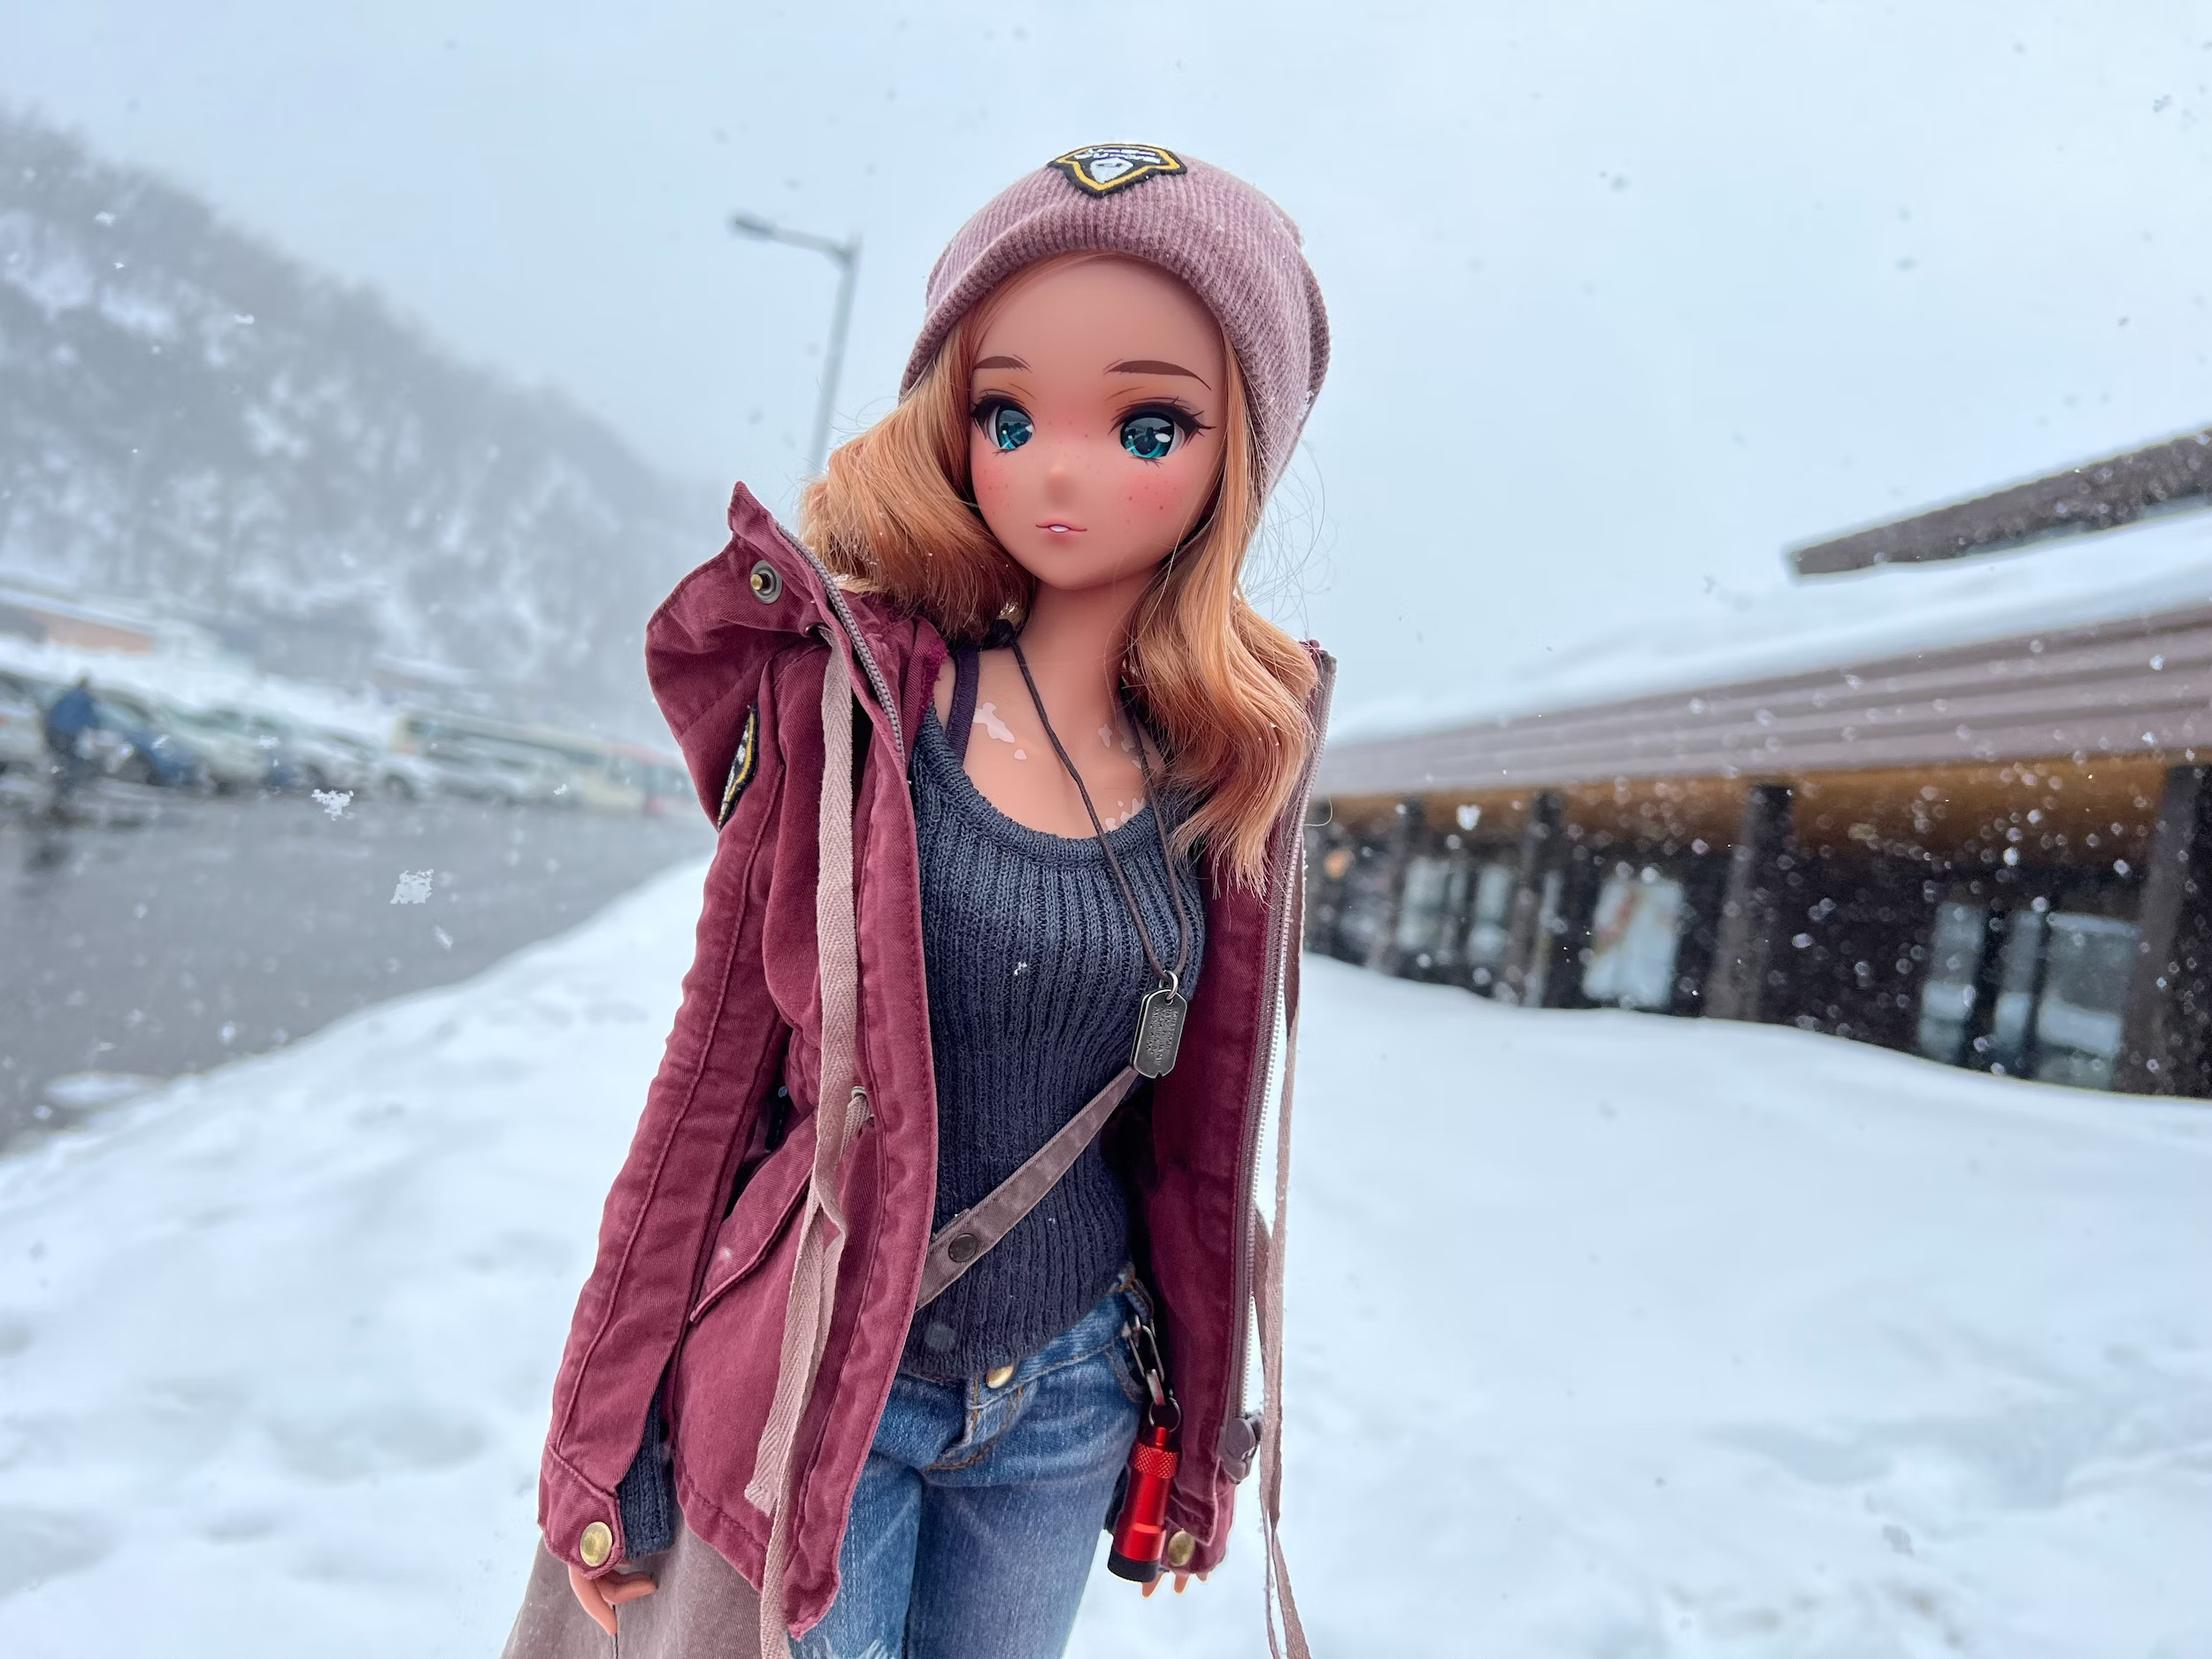 A Smartdoll standing in the snow.  Image from the official website.